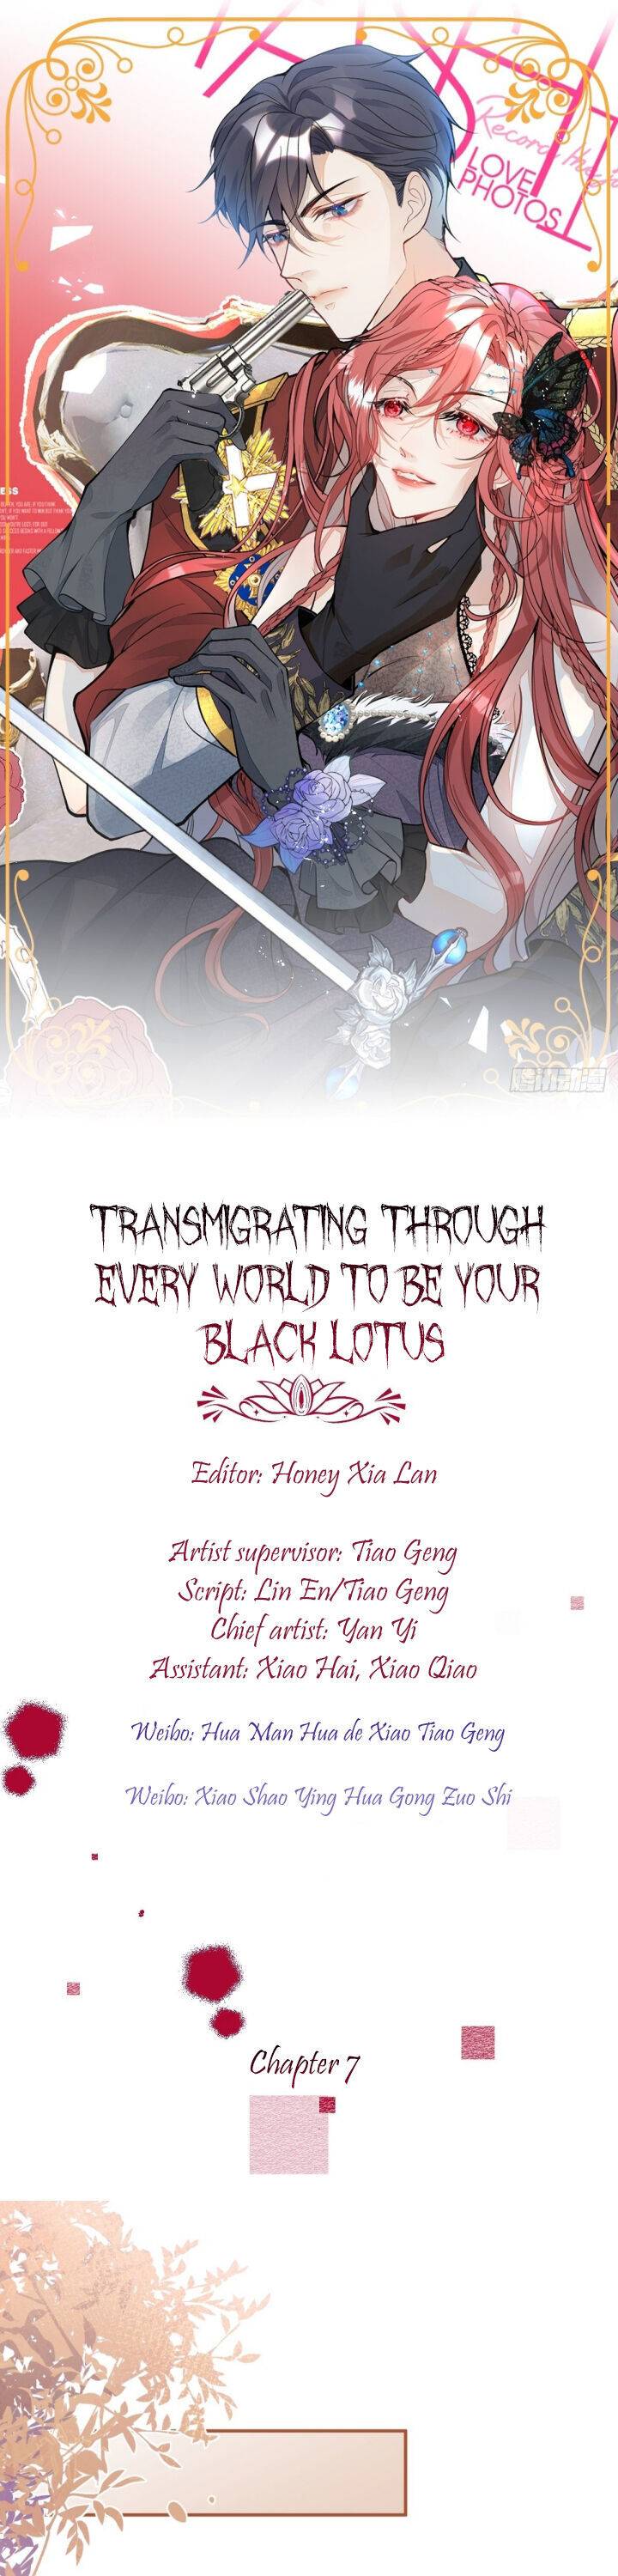 Transmigrating Through Every World To Be Your Black Lotus Chapter 7 #1